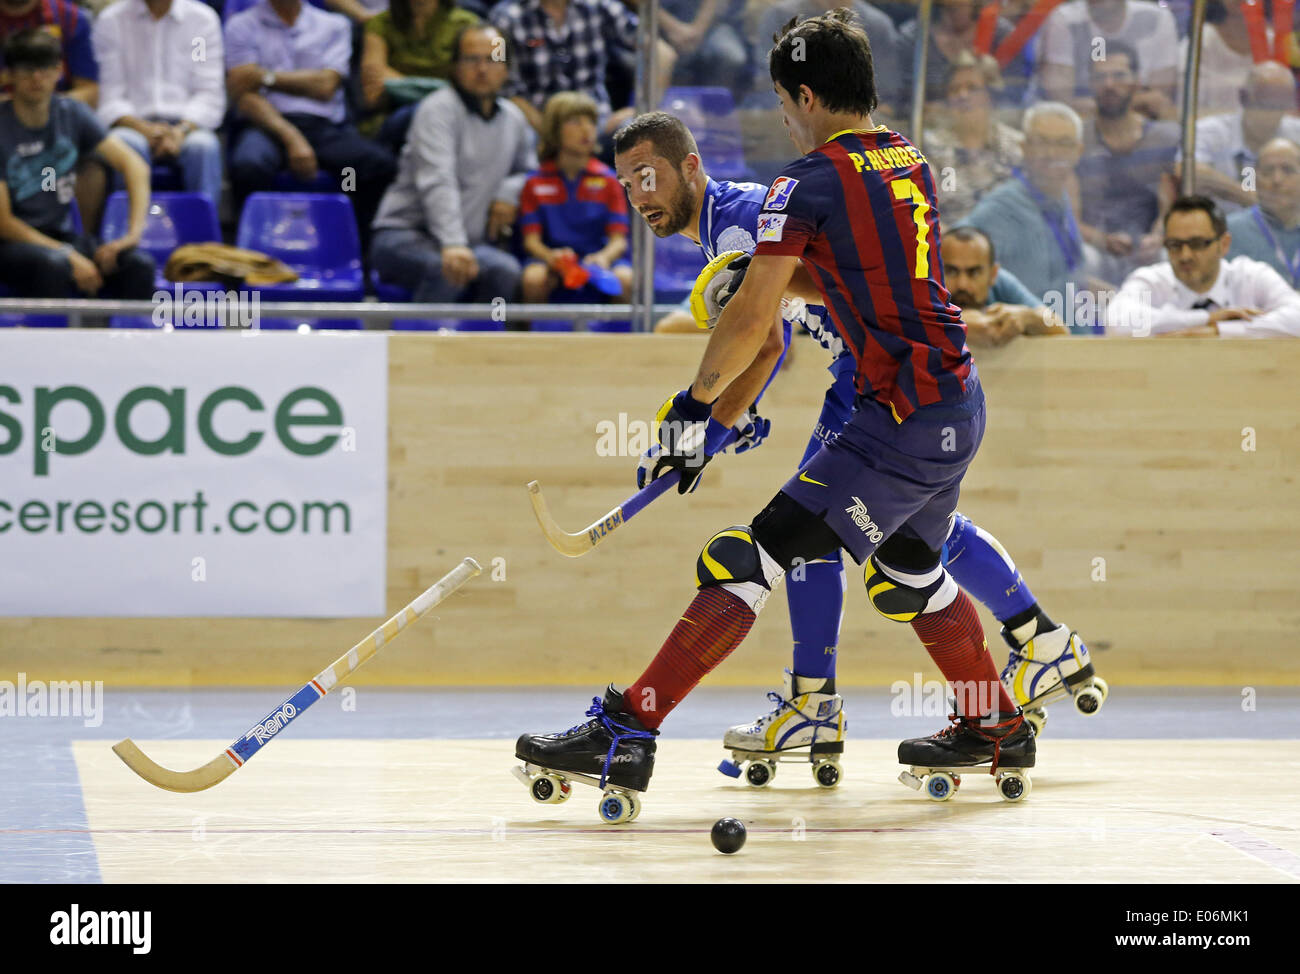 Barcelona, Spain. 4th May, 2014. BARCELONA-04 May- SPAIN: Ricardo Oliveira and Pablo Alvarez in the final game of the Euroleague Final FourRink Hockey between FC Porto and FC Barcelona played at the Palau Blaugrana, the May 4, 2014 Photo:. Joan Valls/Urbanandsport/Nurphoto. © Joan Valls/NurPhoto/ZUMAPRESS.com/Alamy Live News Stock Photo